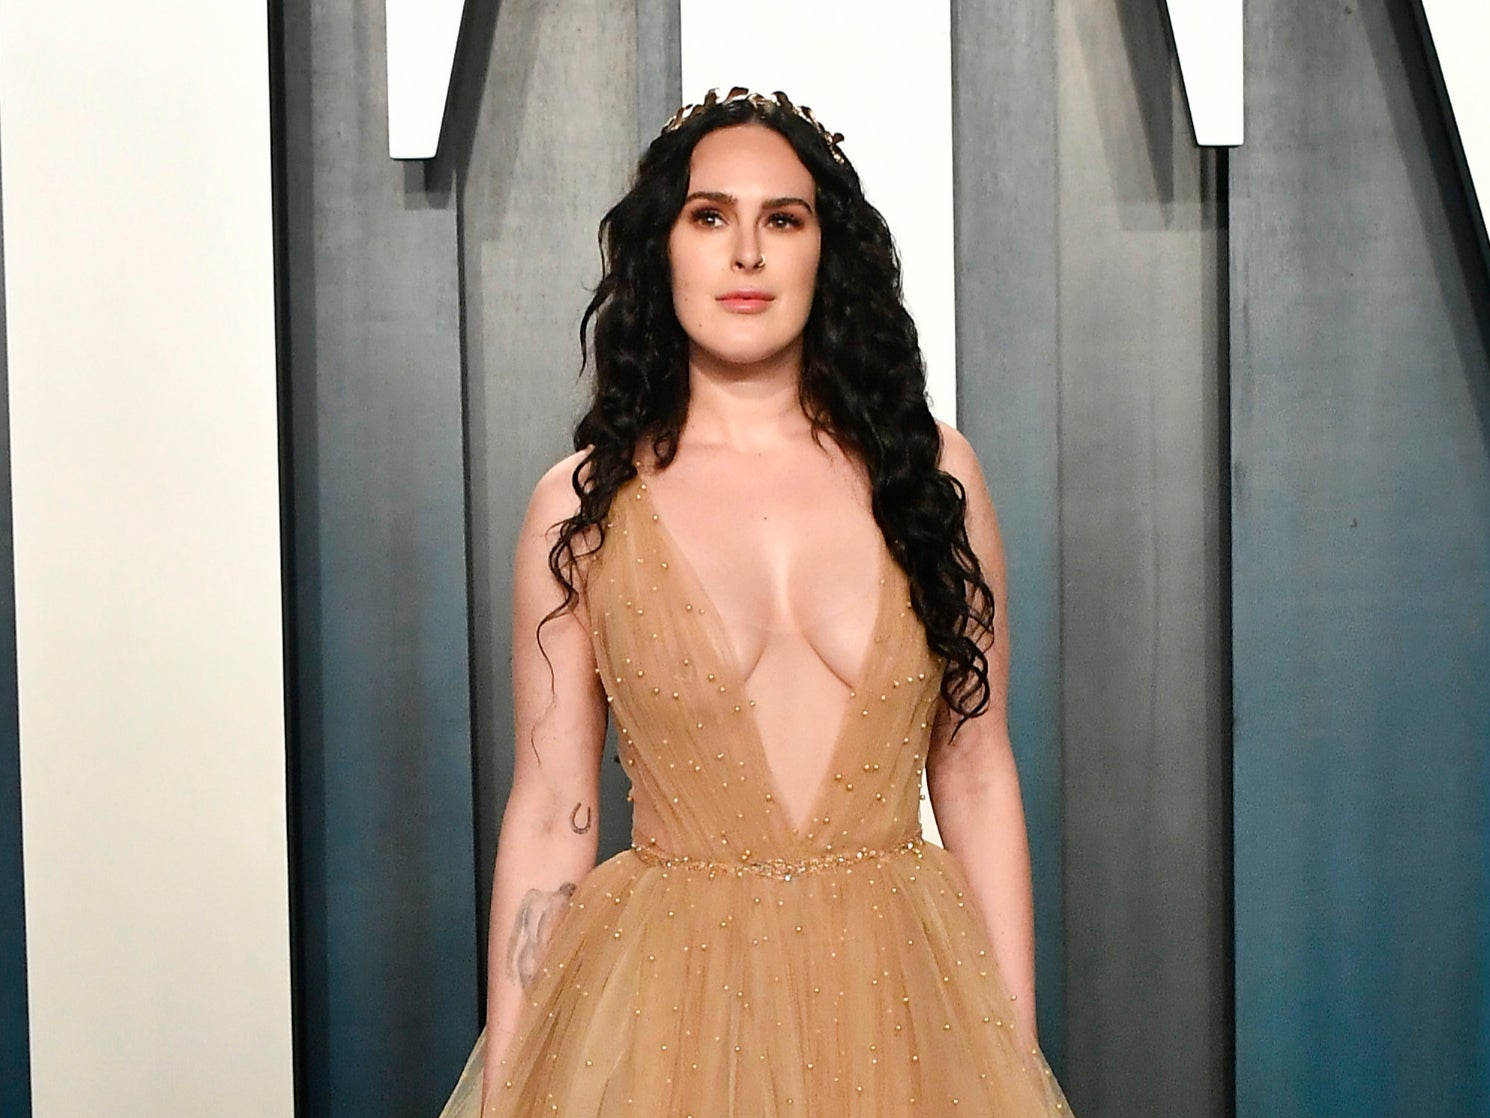 Rumer Willis attends the 2020 Vanity Fair Oscar Party hosted by Radhika Jones at Wallis Annenberg Center for the Performing Arts on February 09, 2020